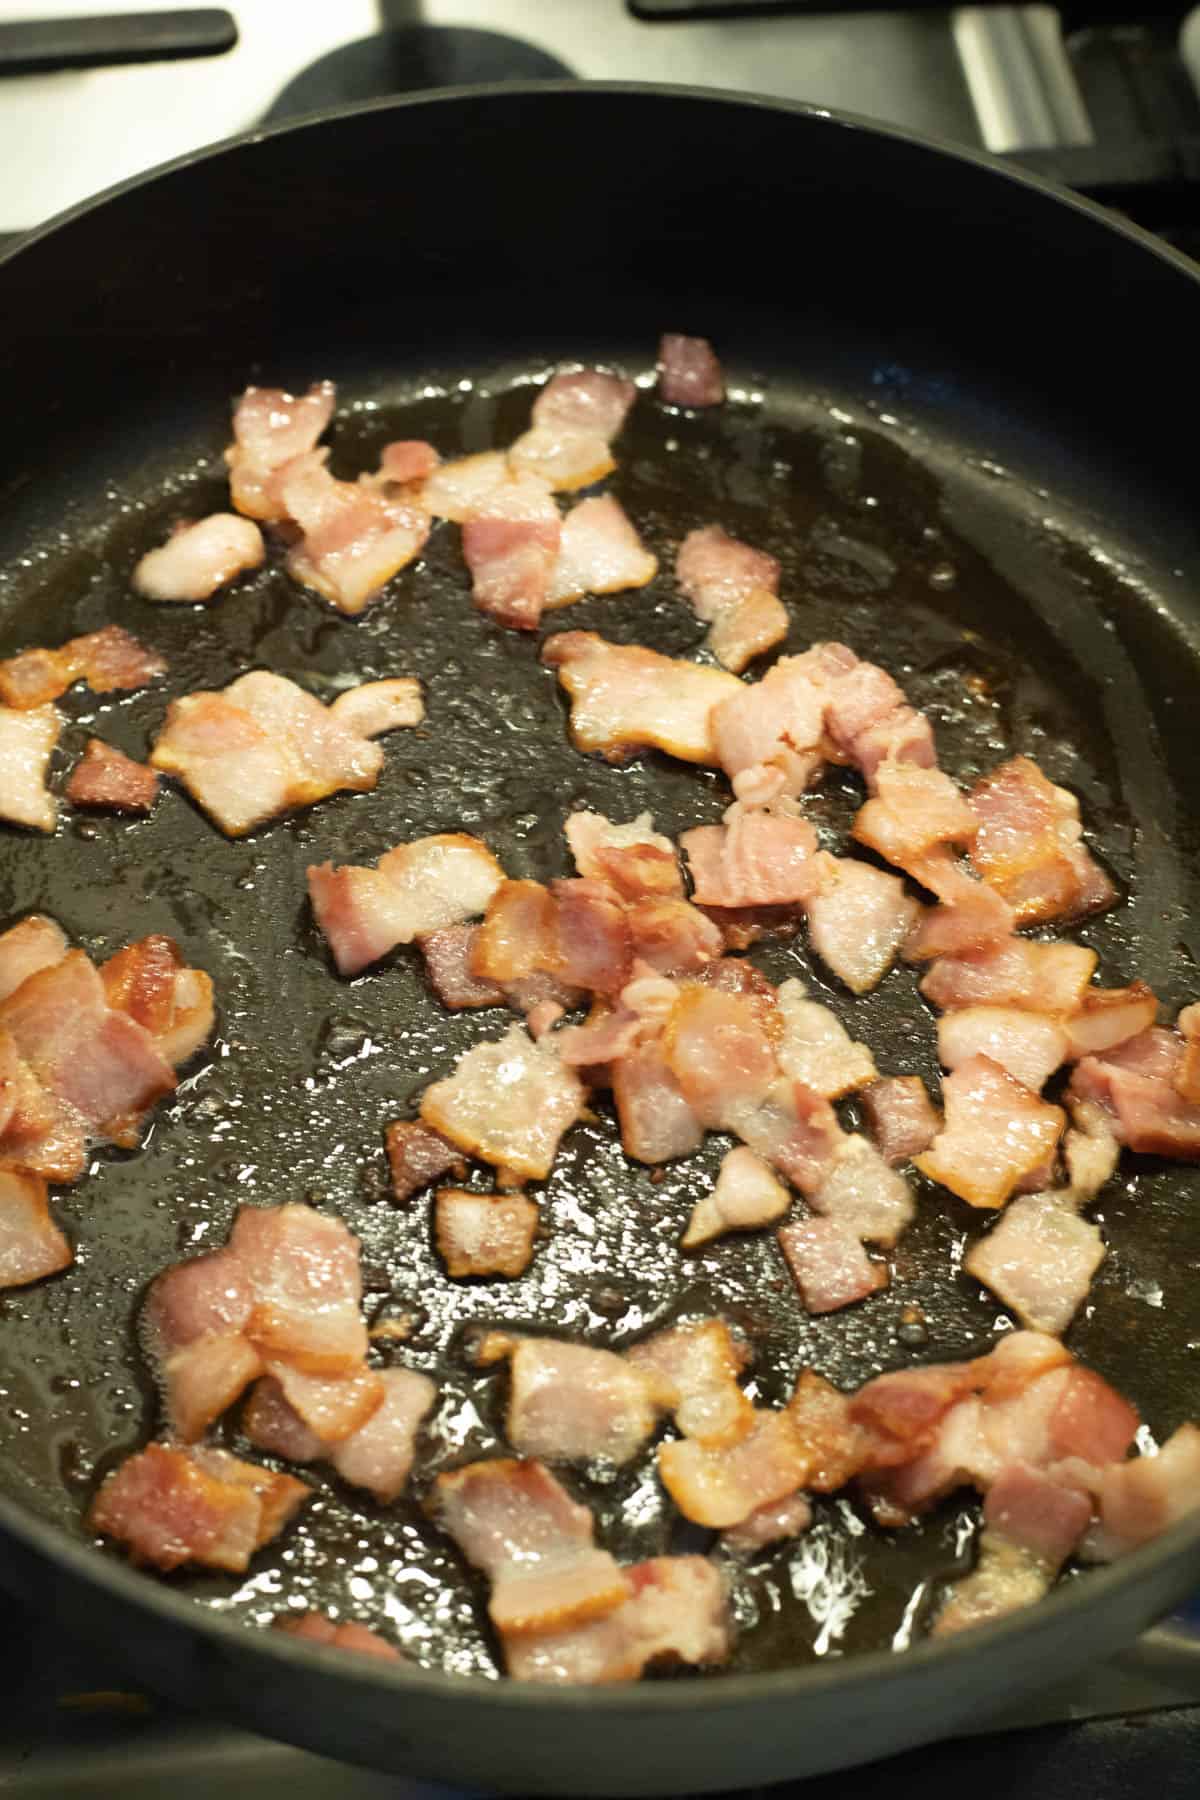 A skillet of cooked bacon.